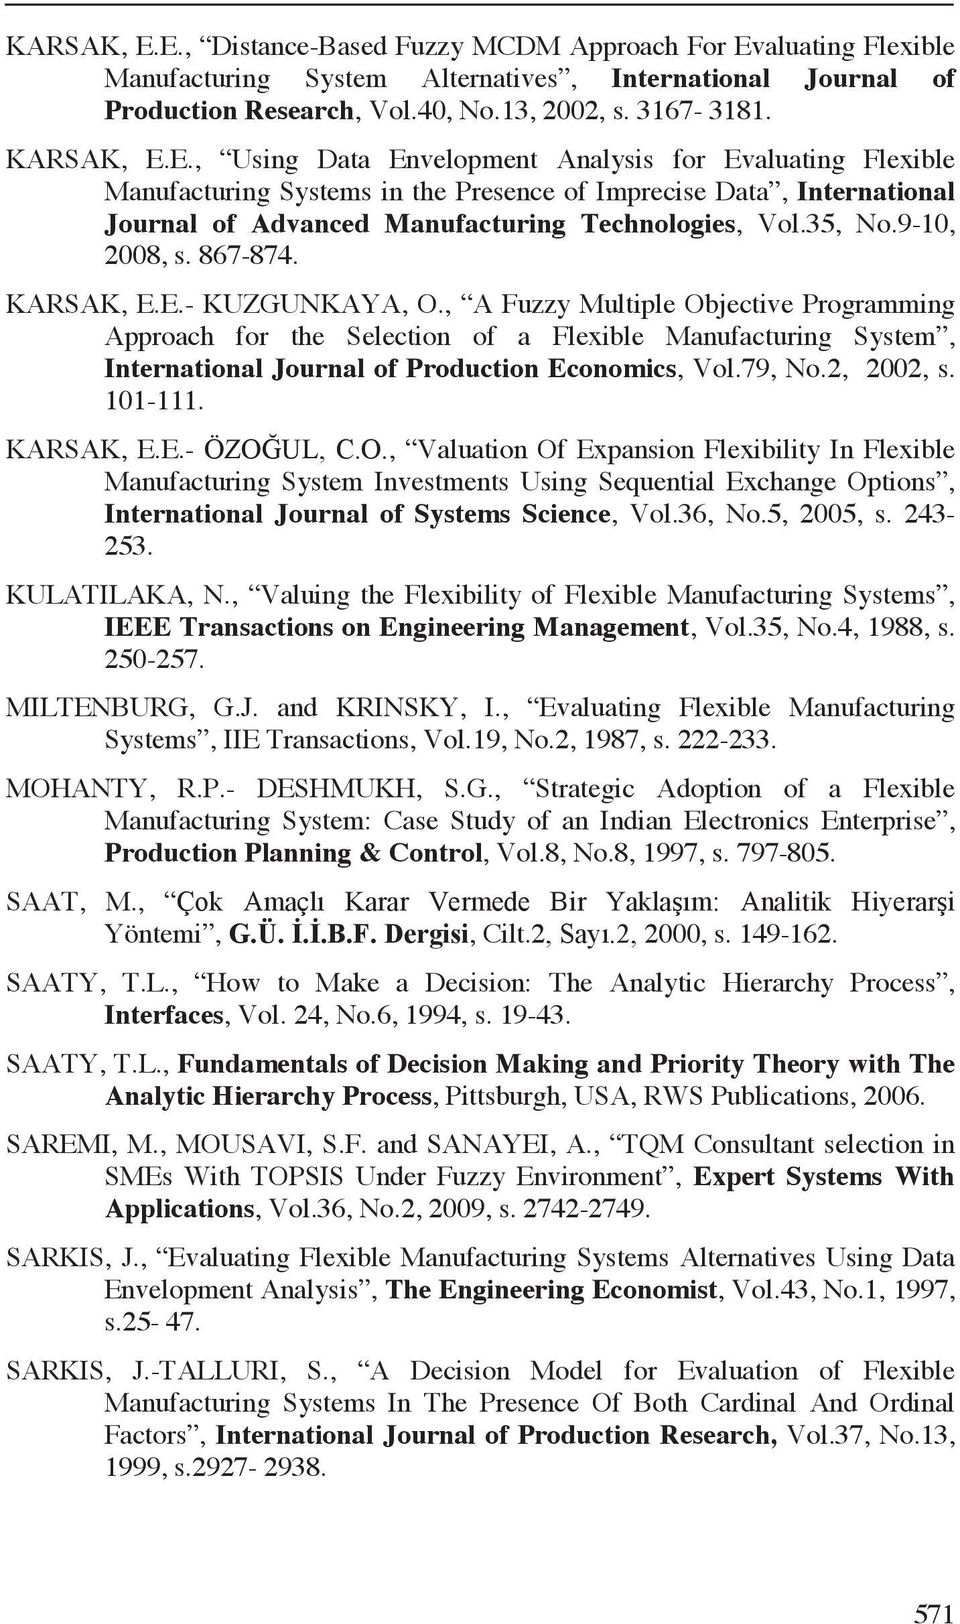 , A Fuzzy Multiple Objective Programming Approach for the Selection of a Fleible Manufacturing System, International Journal of Production Ec